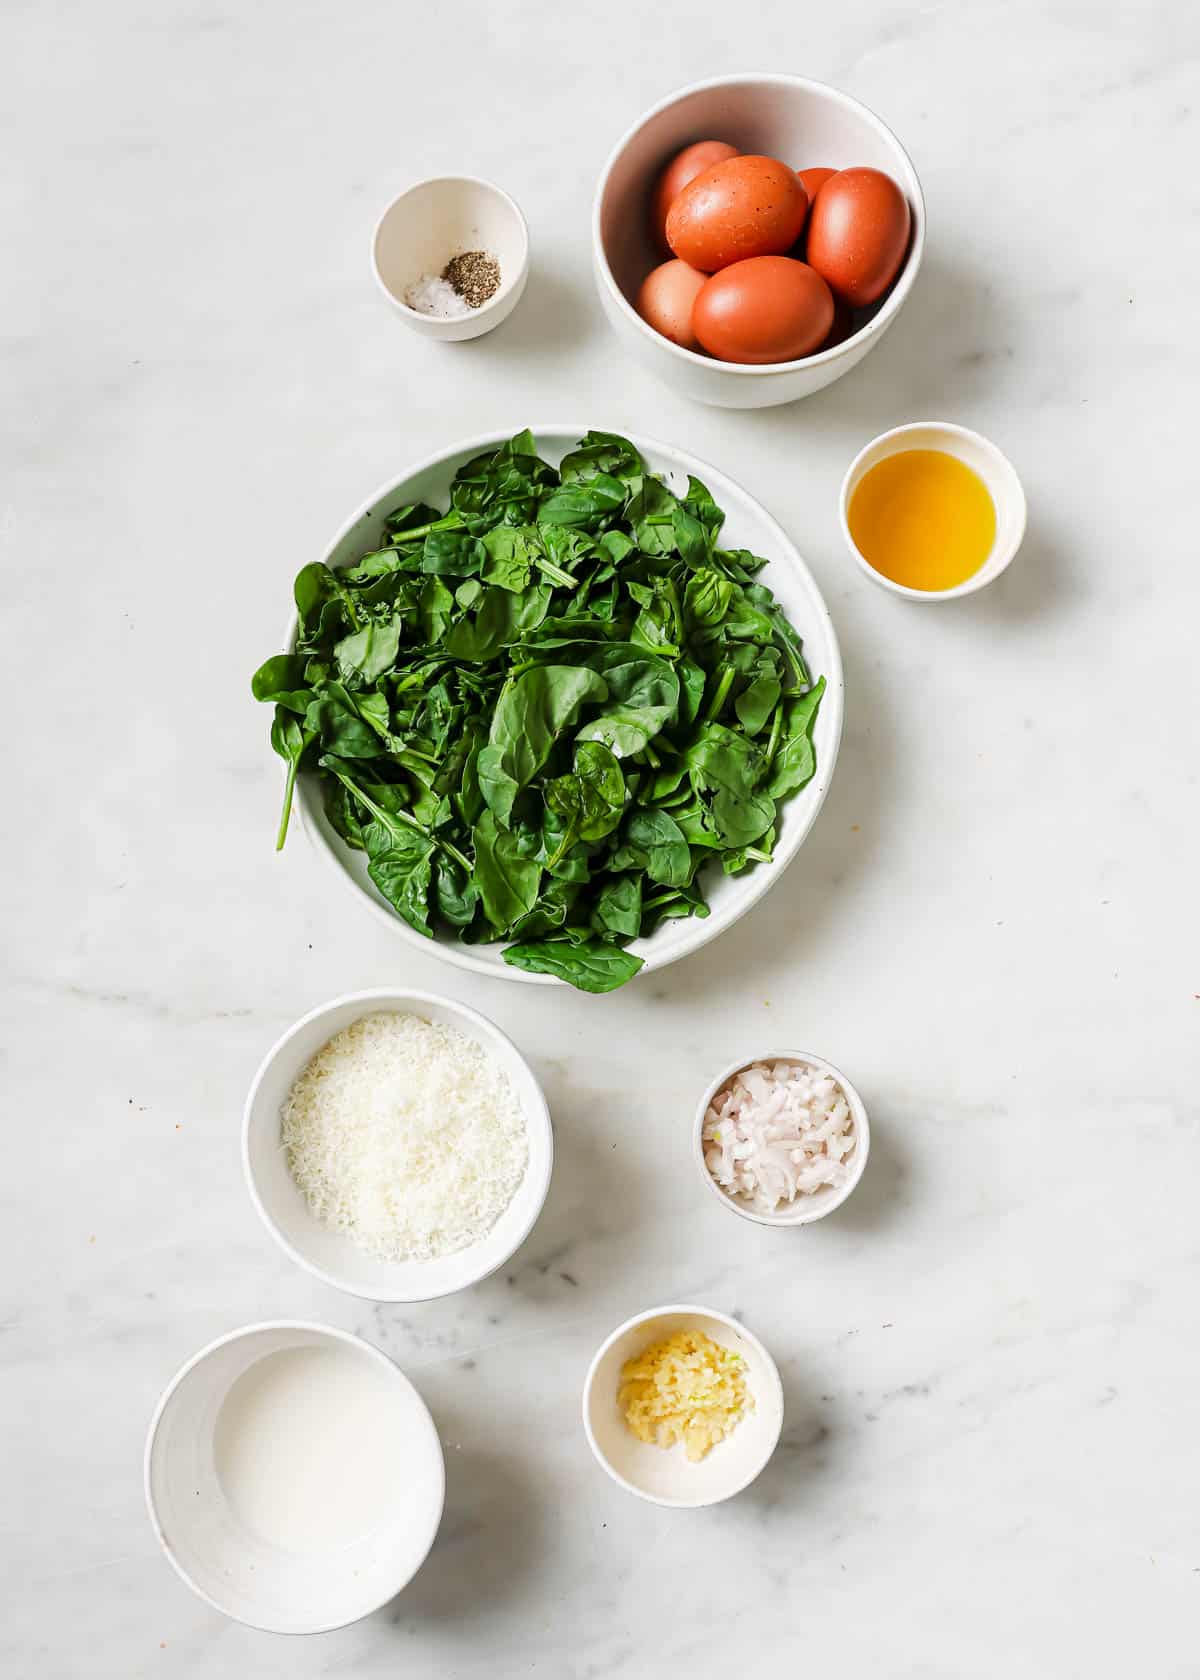 Ingredients to make a spinach frittata in bowls on a white surface.